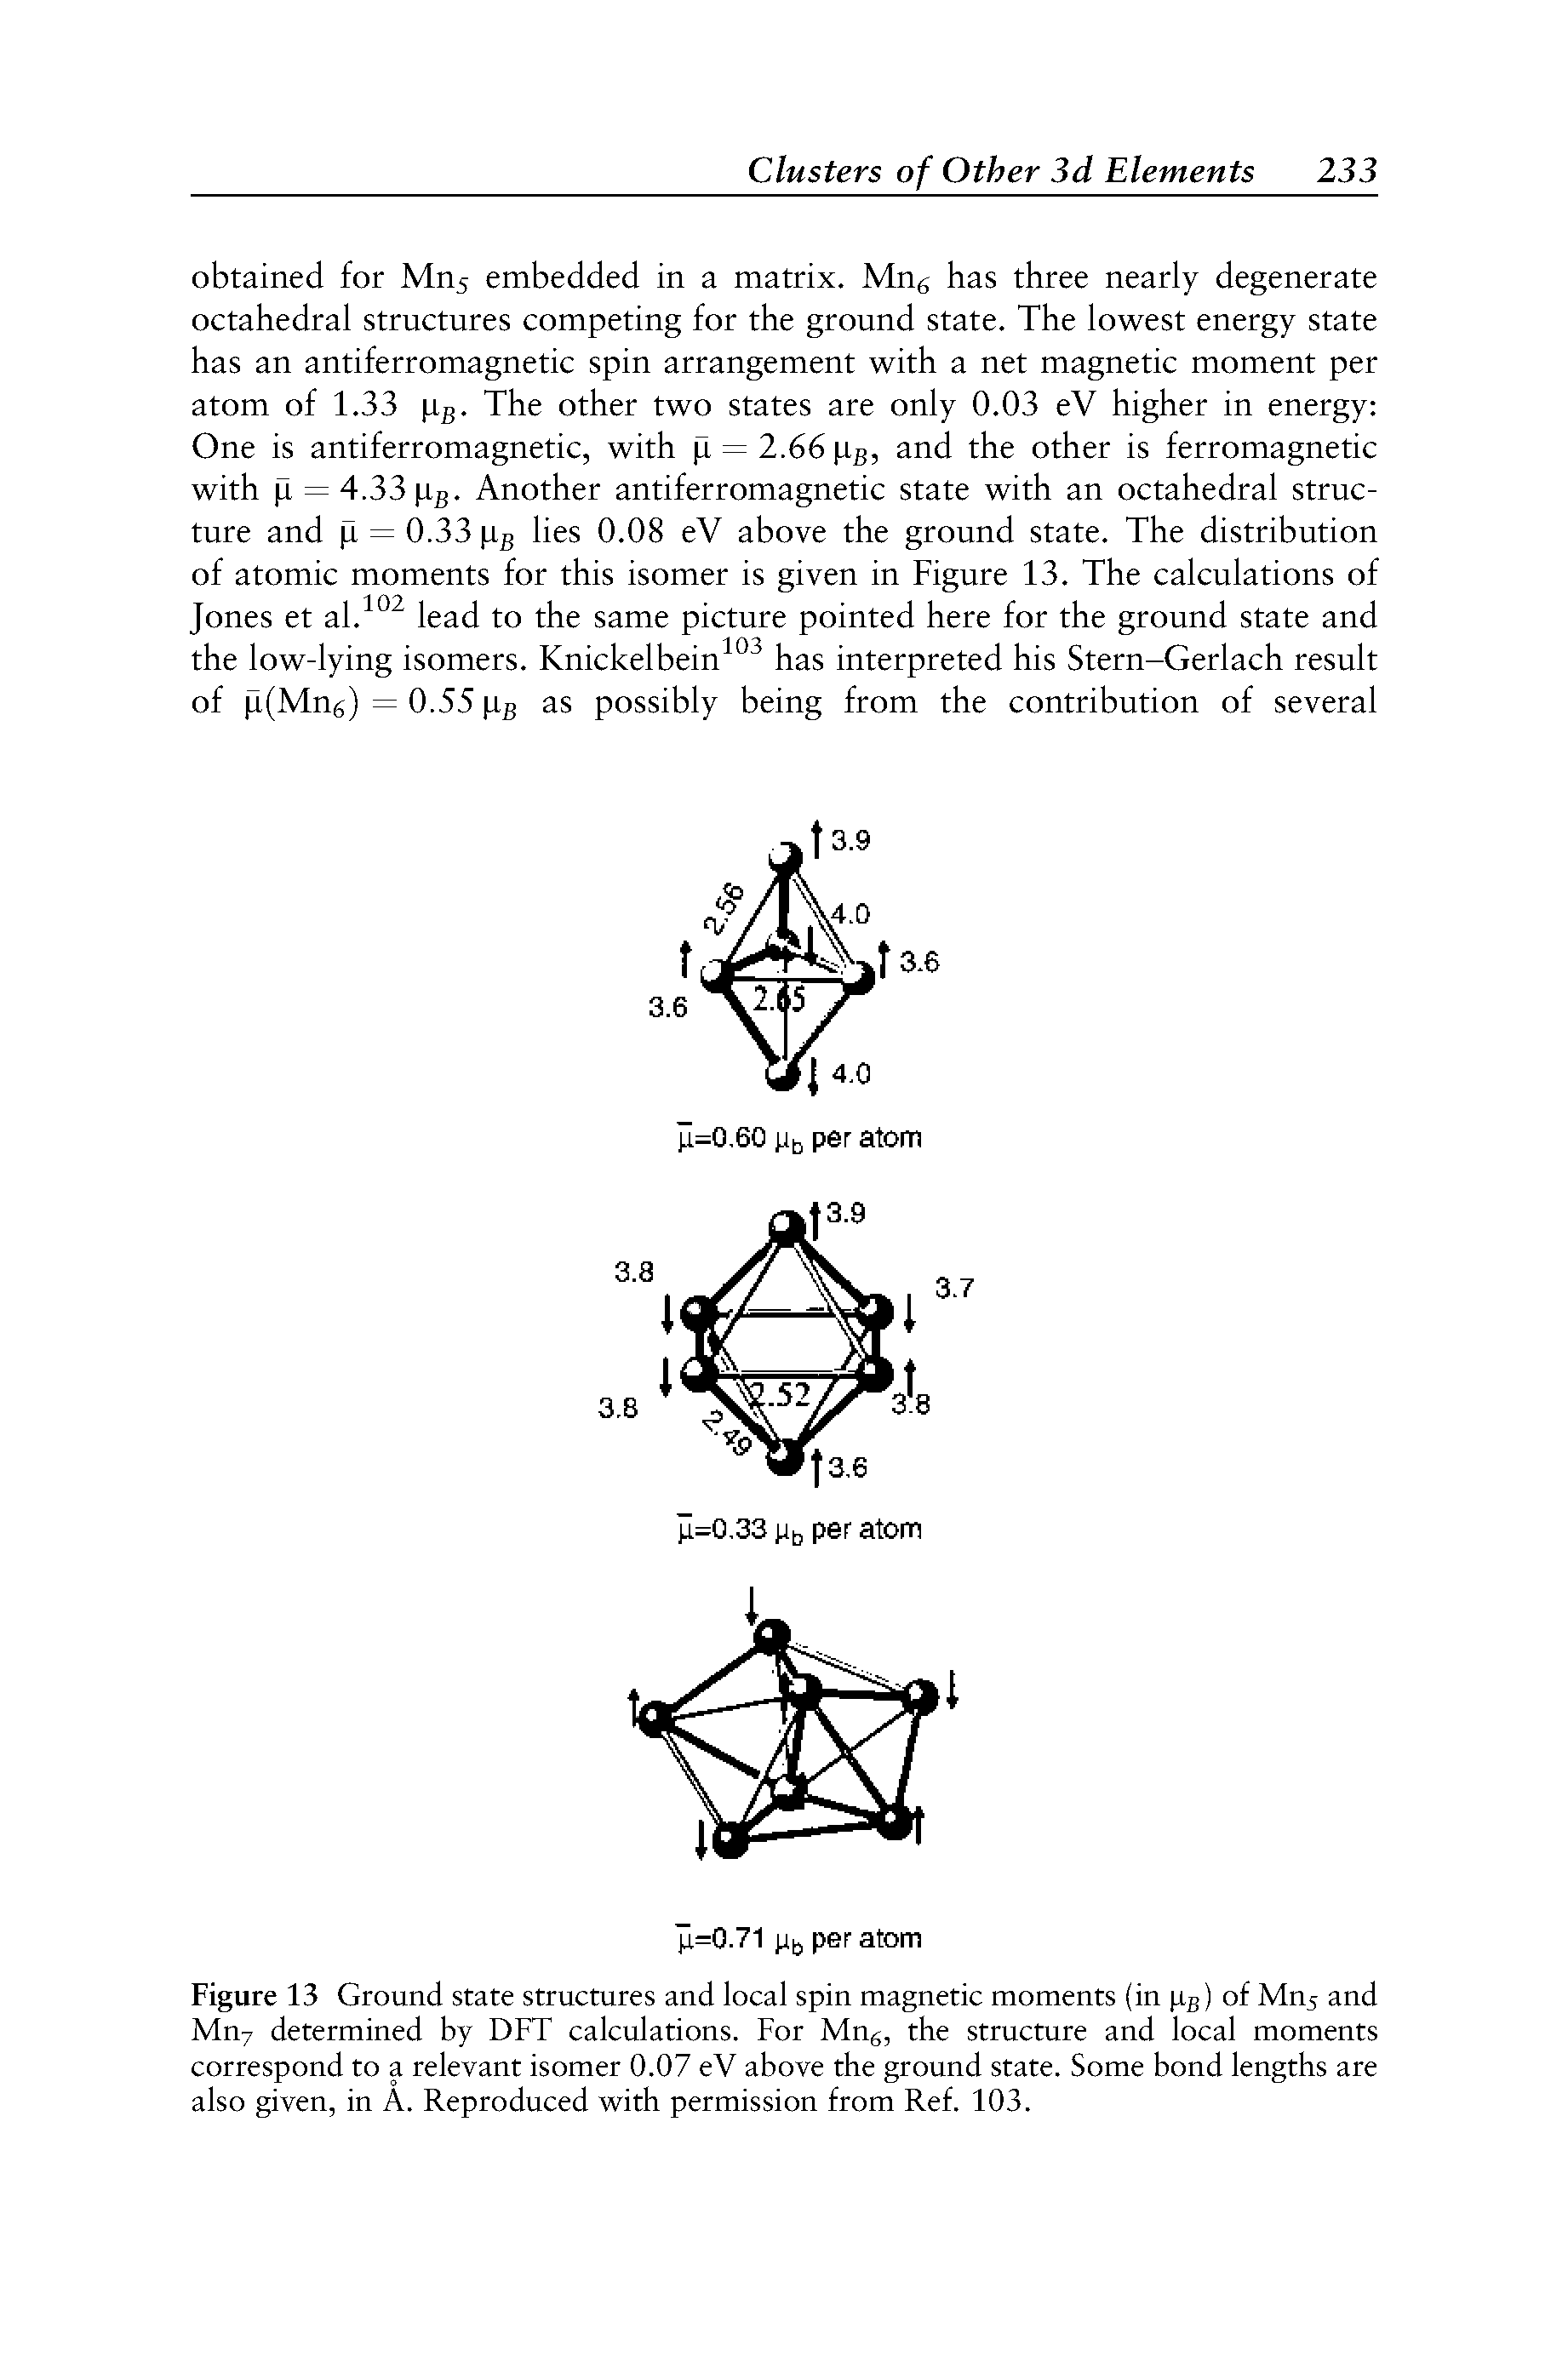 Figure 13 Ground state structures and local spin magnetic moments (in pB) of Mn5 and Mn7 determined by DFT calculations. For Mng, the structure and local moments correspond to a relevant isomer 0.07 eV above the ground state. Some bond lengths are also given, in A. Reproduced with permission from Ref. 103.